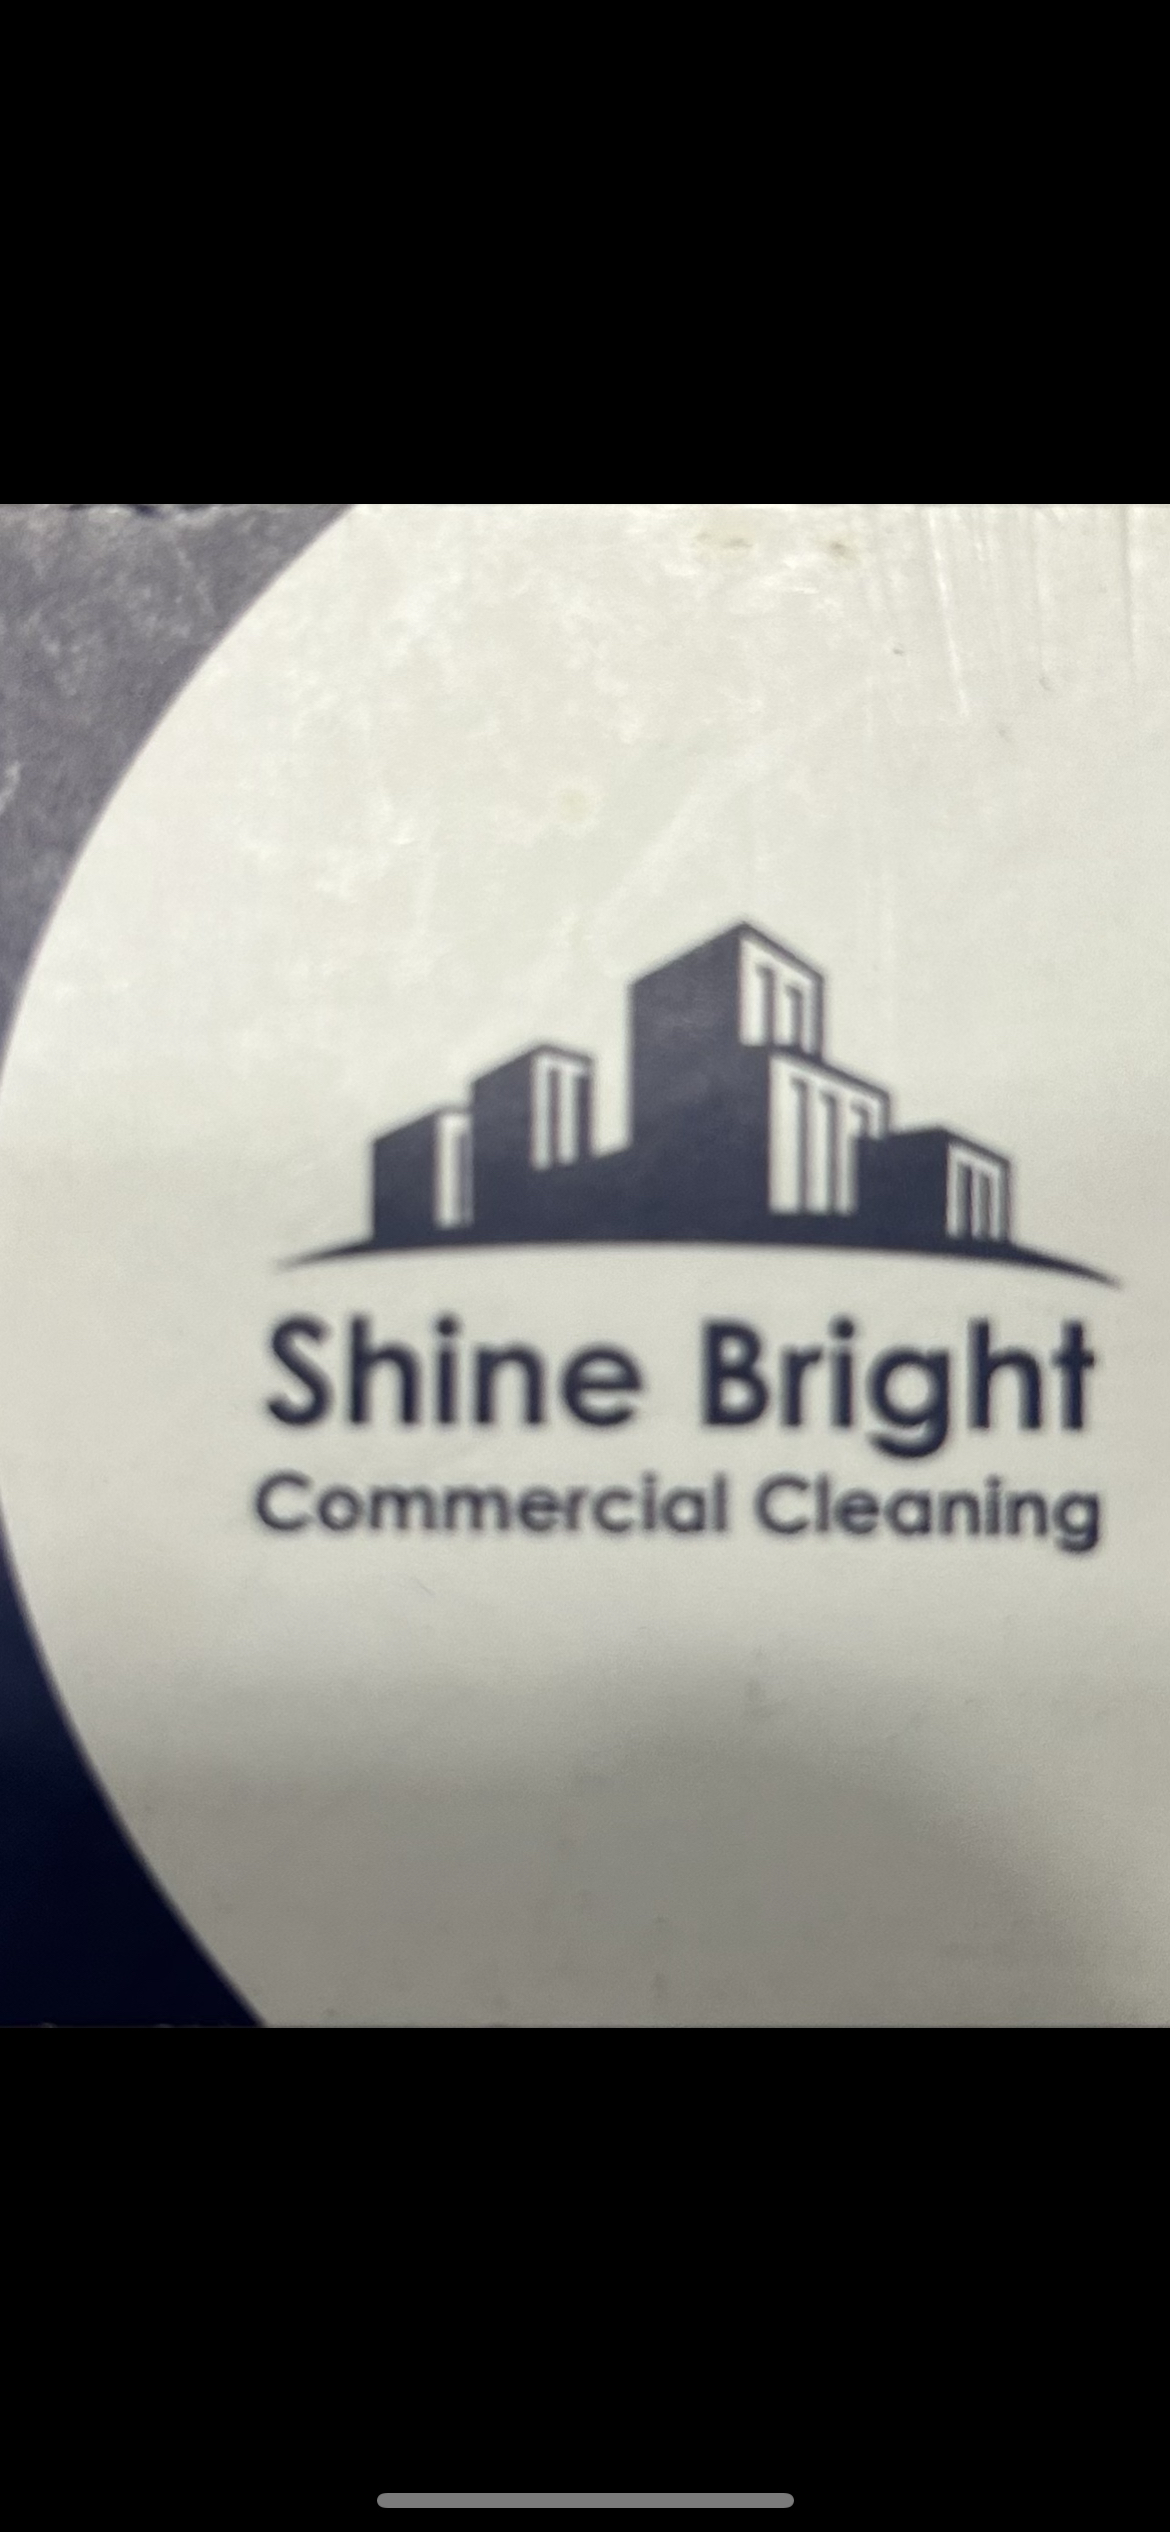 Shine Bright Commercial Cleaning Logo